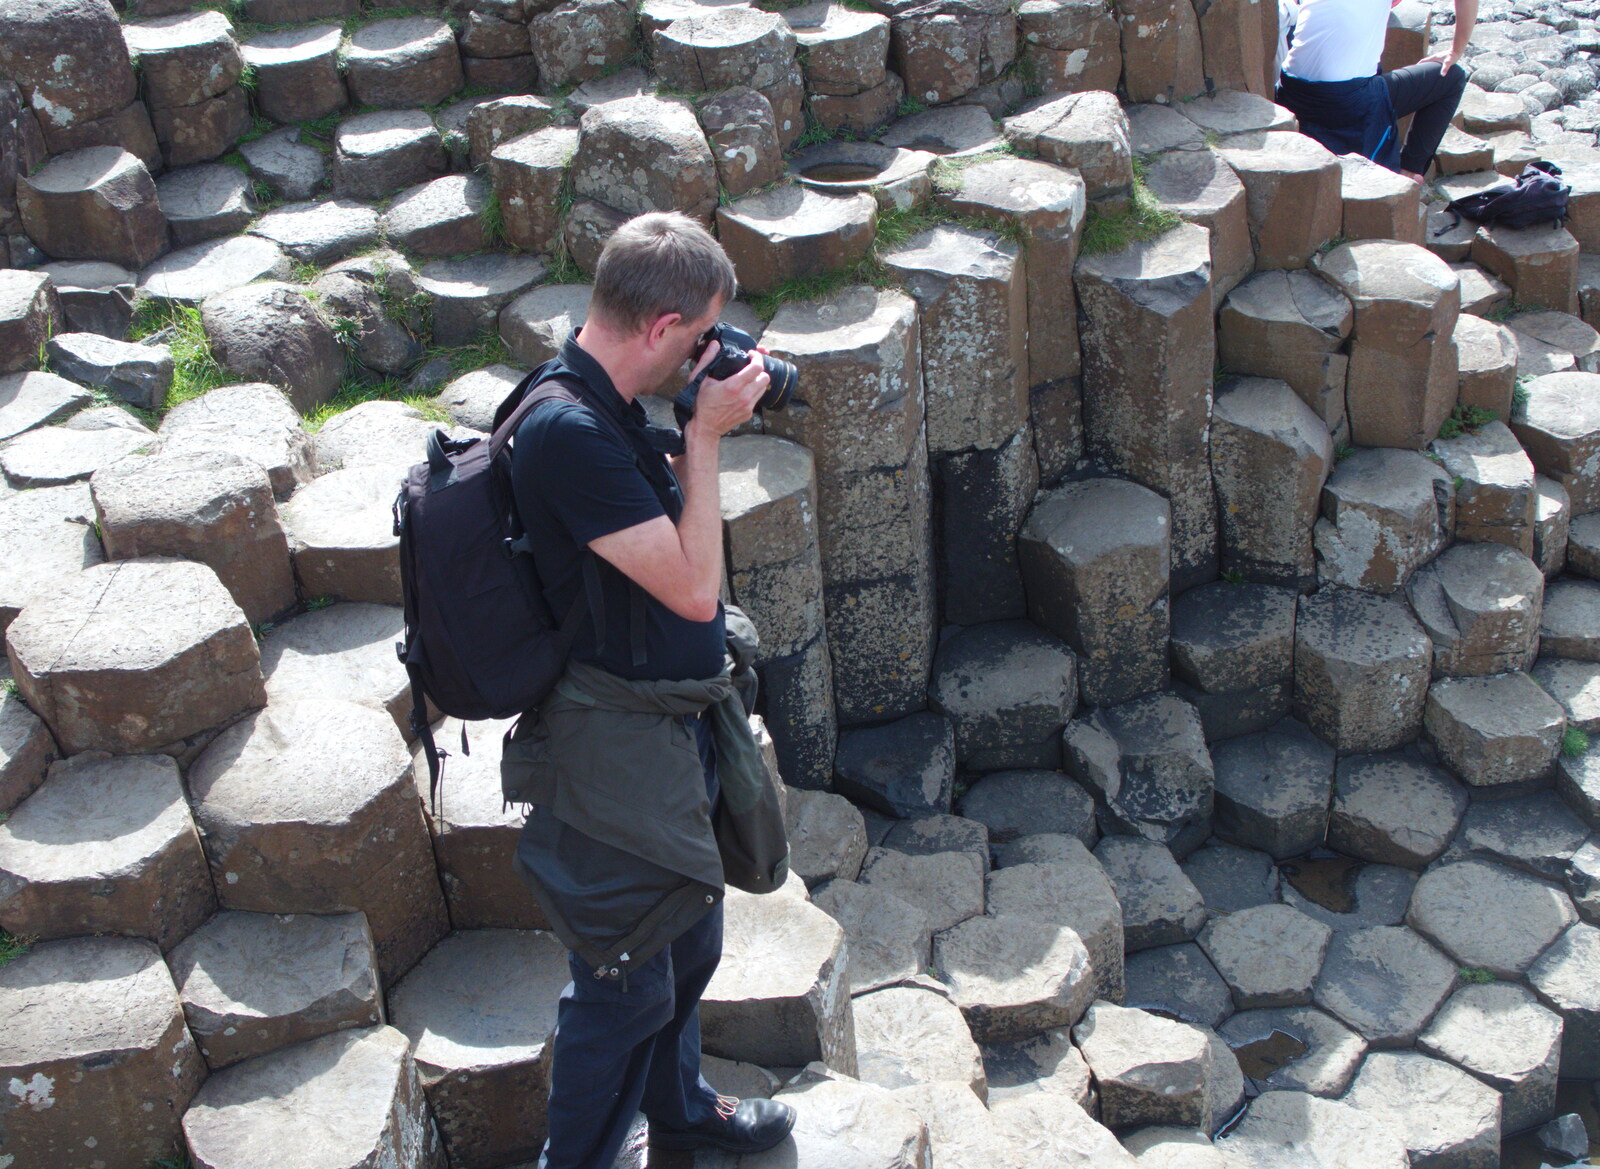 Fred takes a photo of Nosher taking a photo from The Giant's Causeway, Bushmills, County Antrim, Northern Ireland - 14th August 2019